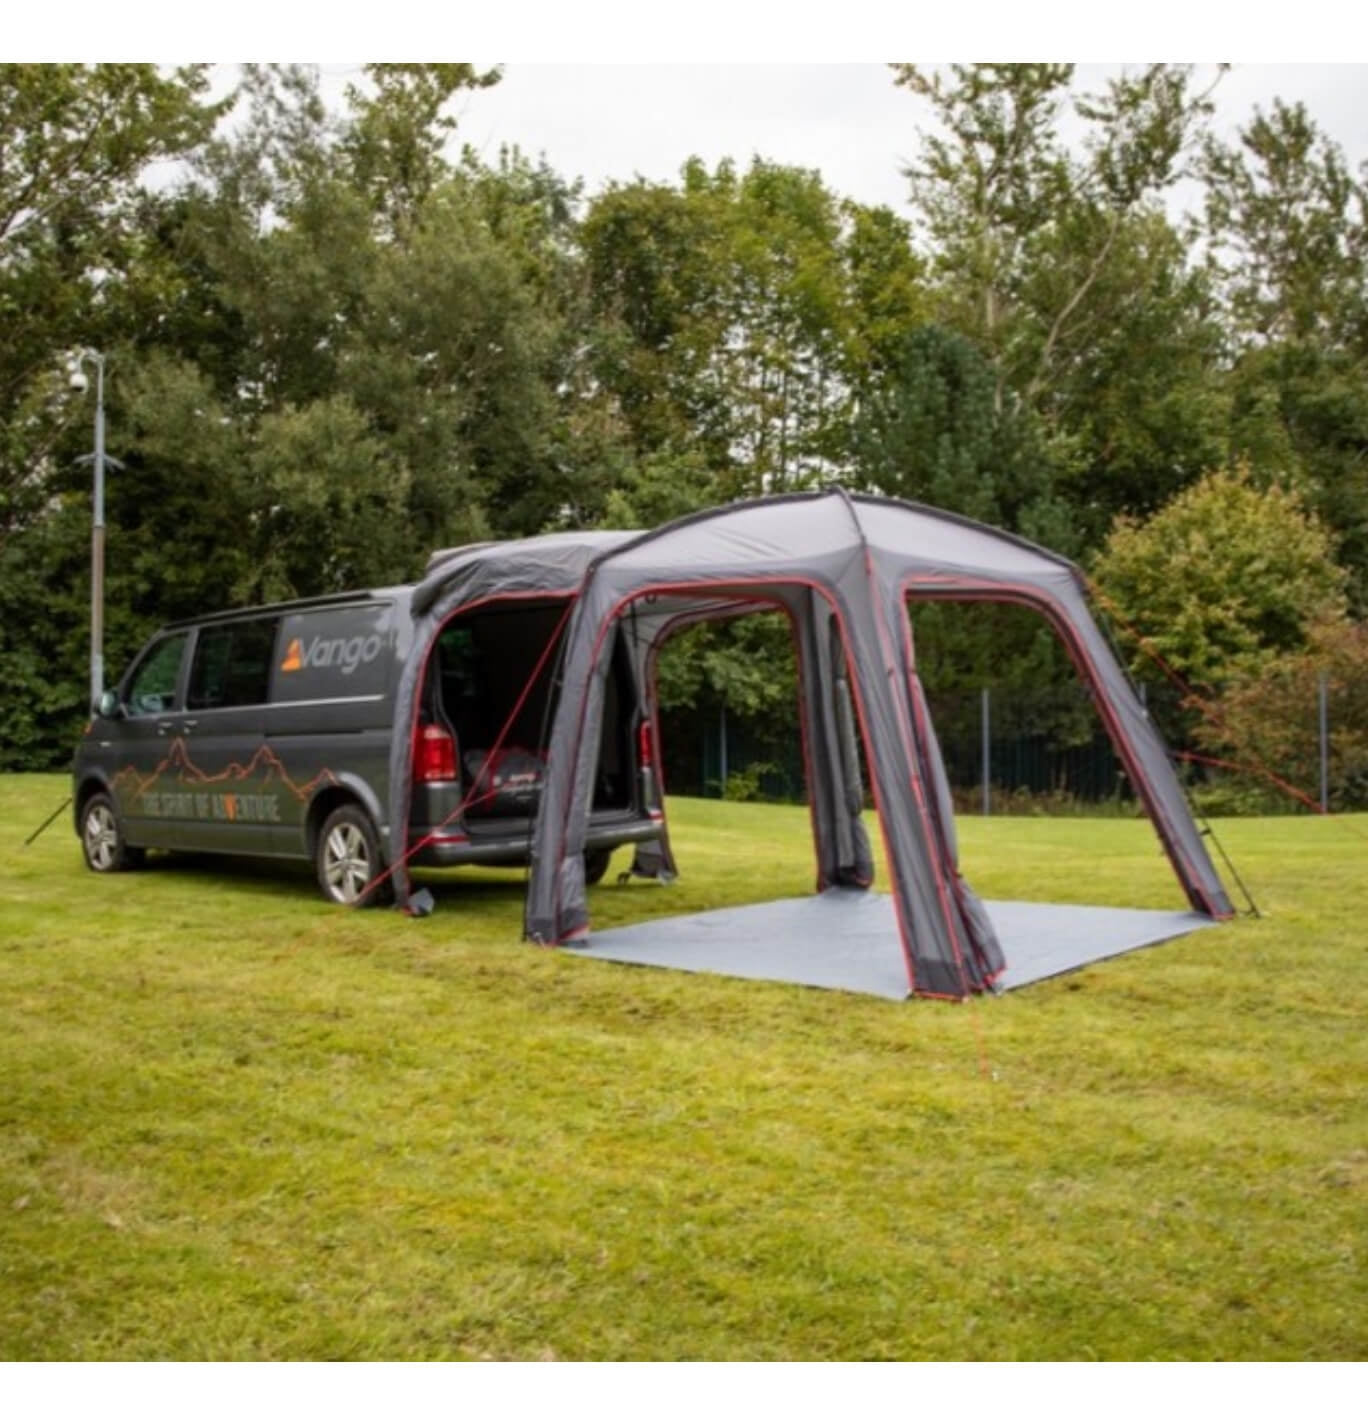 The vango tailgate hub open & attached to vehicle